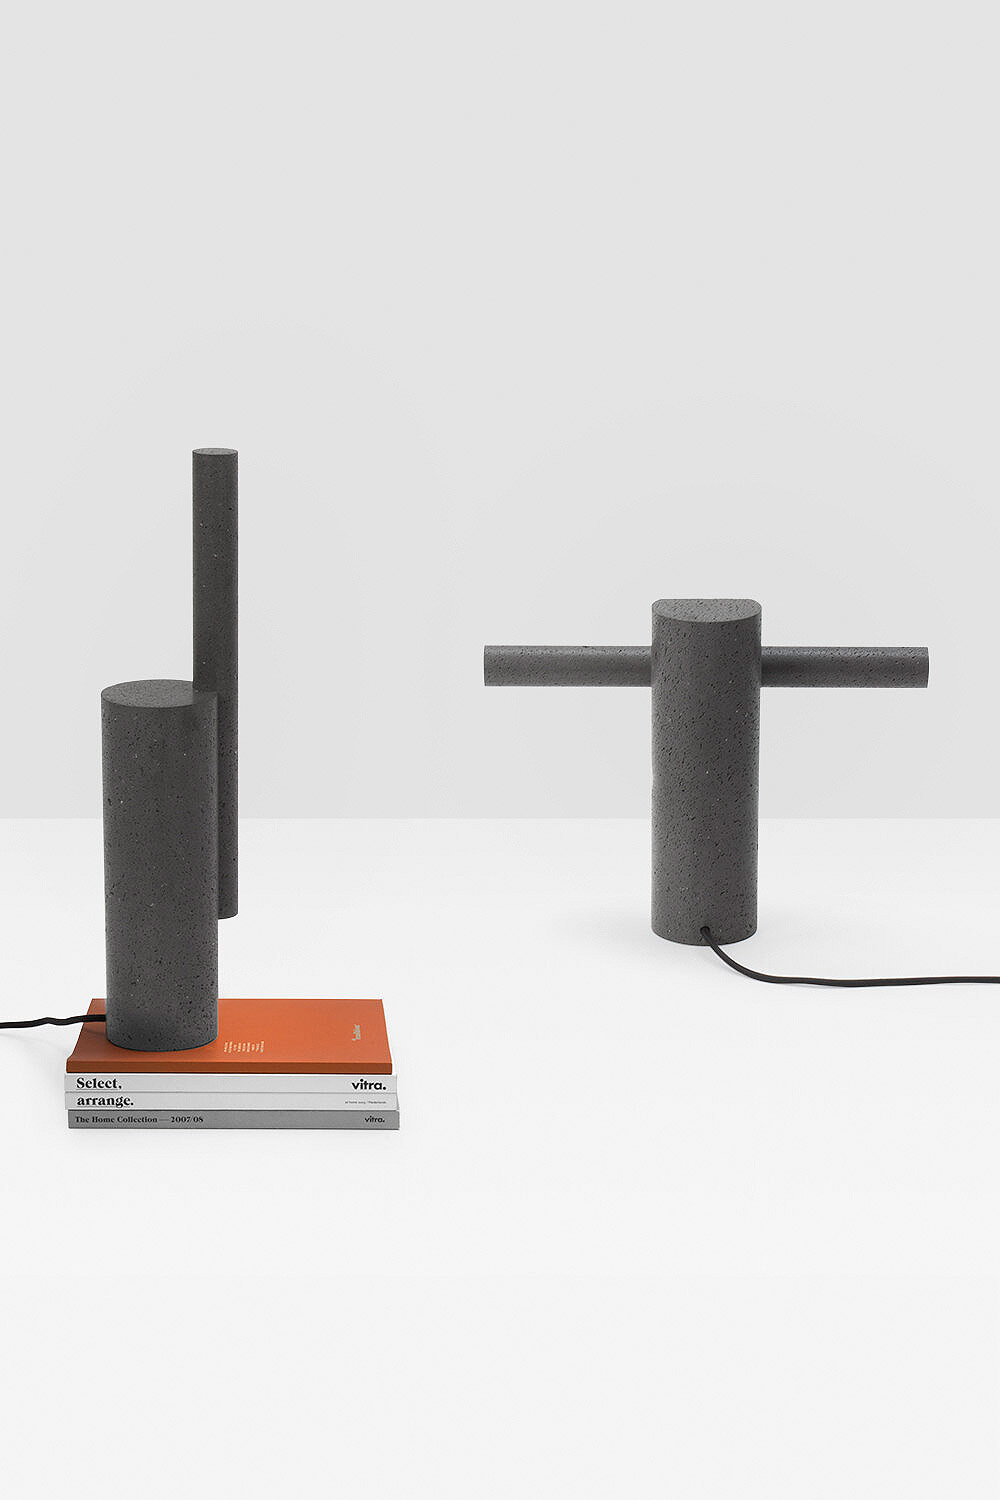 Two Drill Lamps by LeviSarha - Minimalist Table Lamp made of basalt, a volcanic stone | Aesence